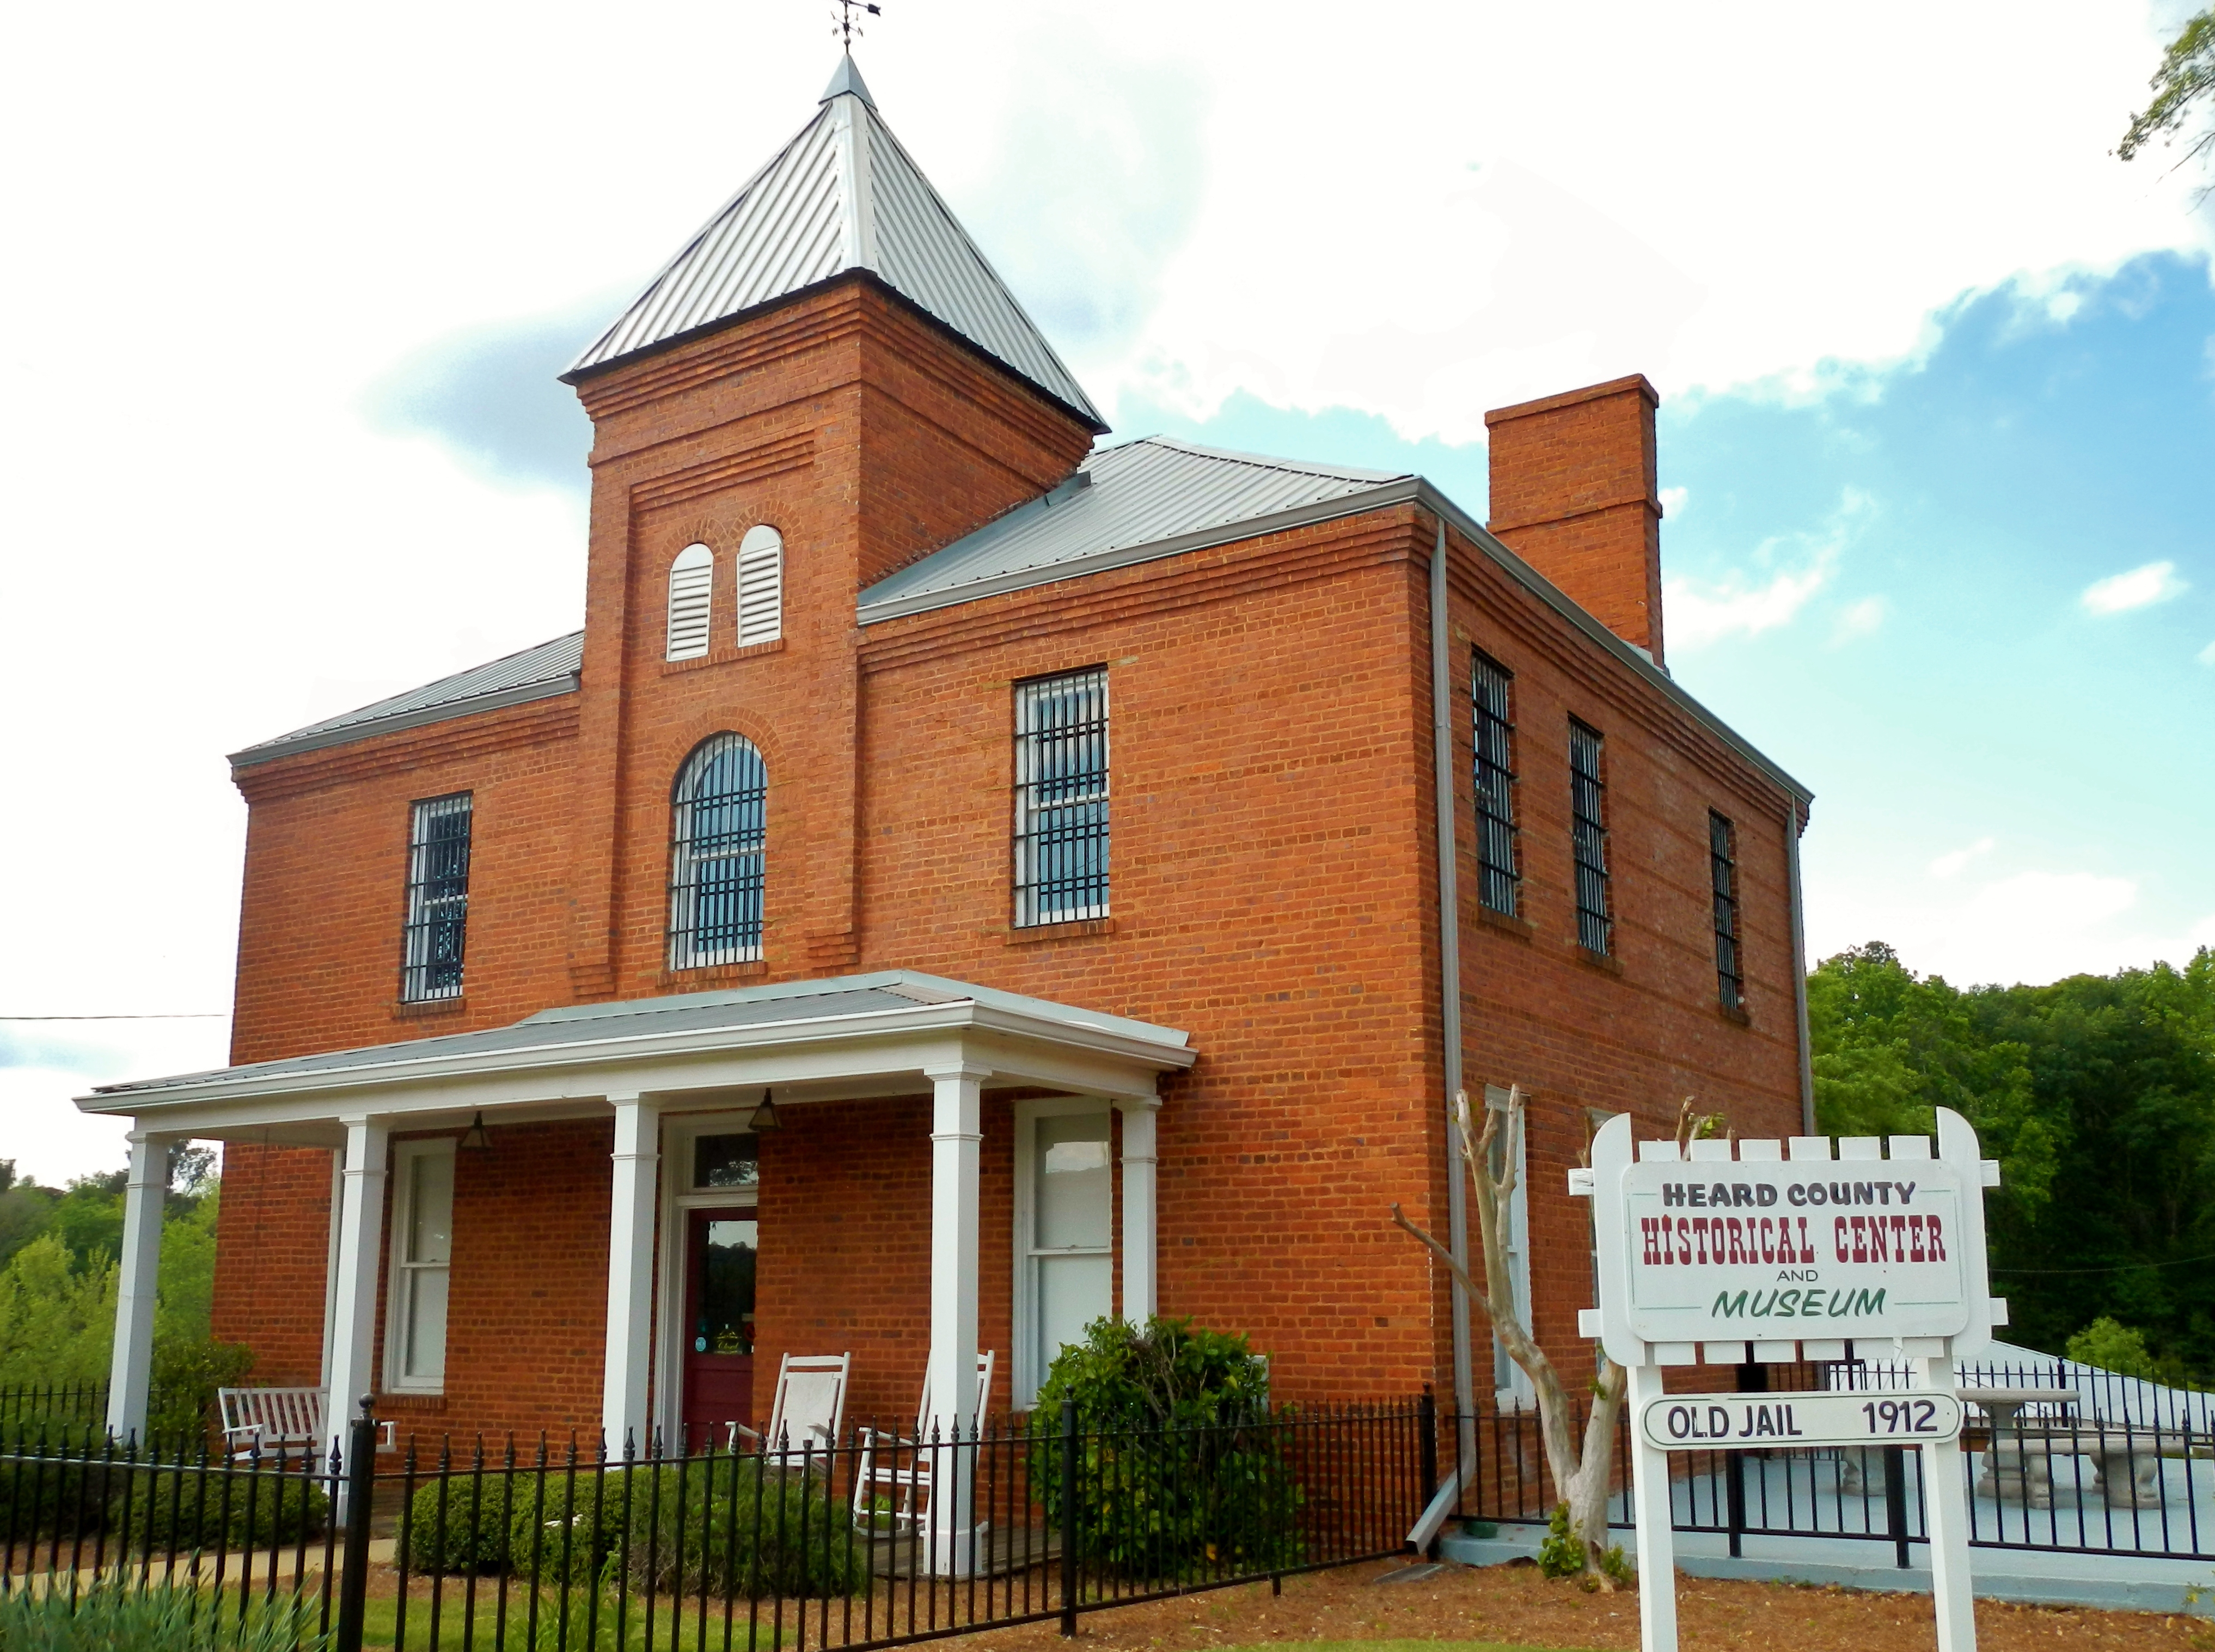 Heard County Jail, now the Heard County Historical Center and Museum